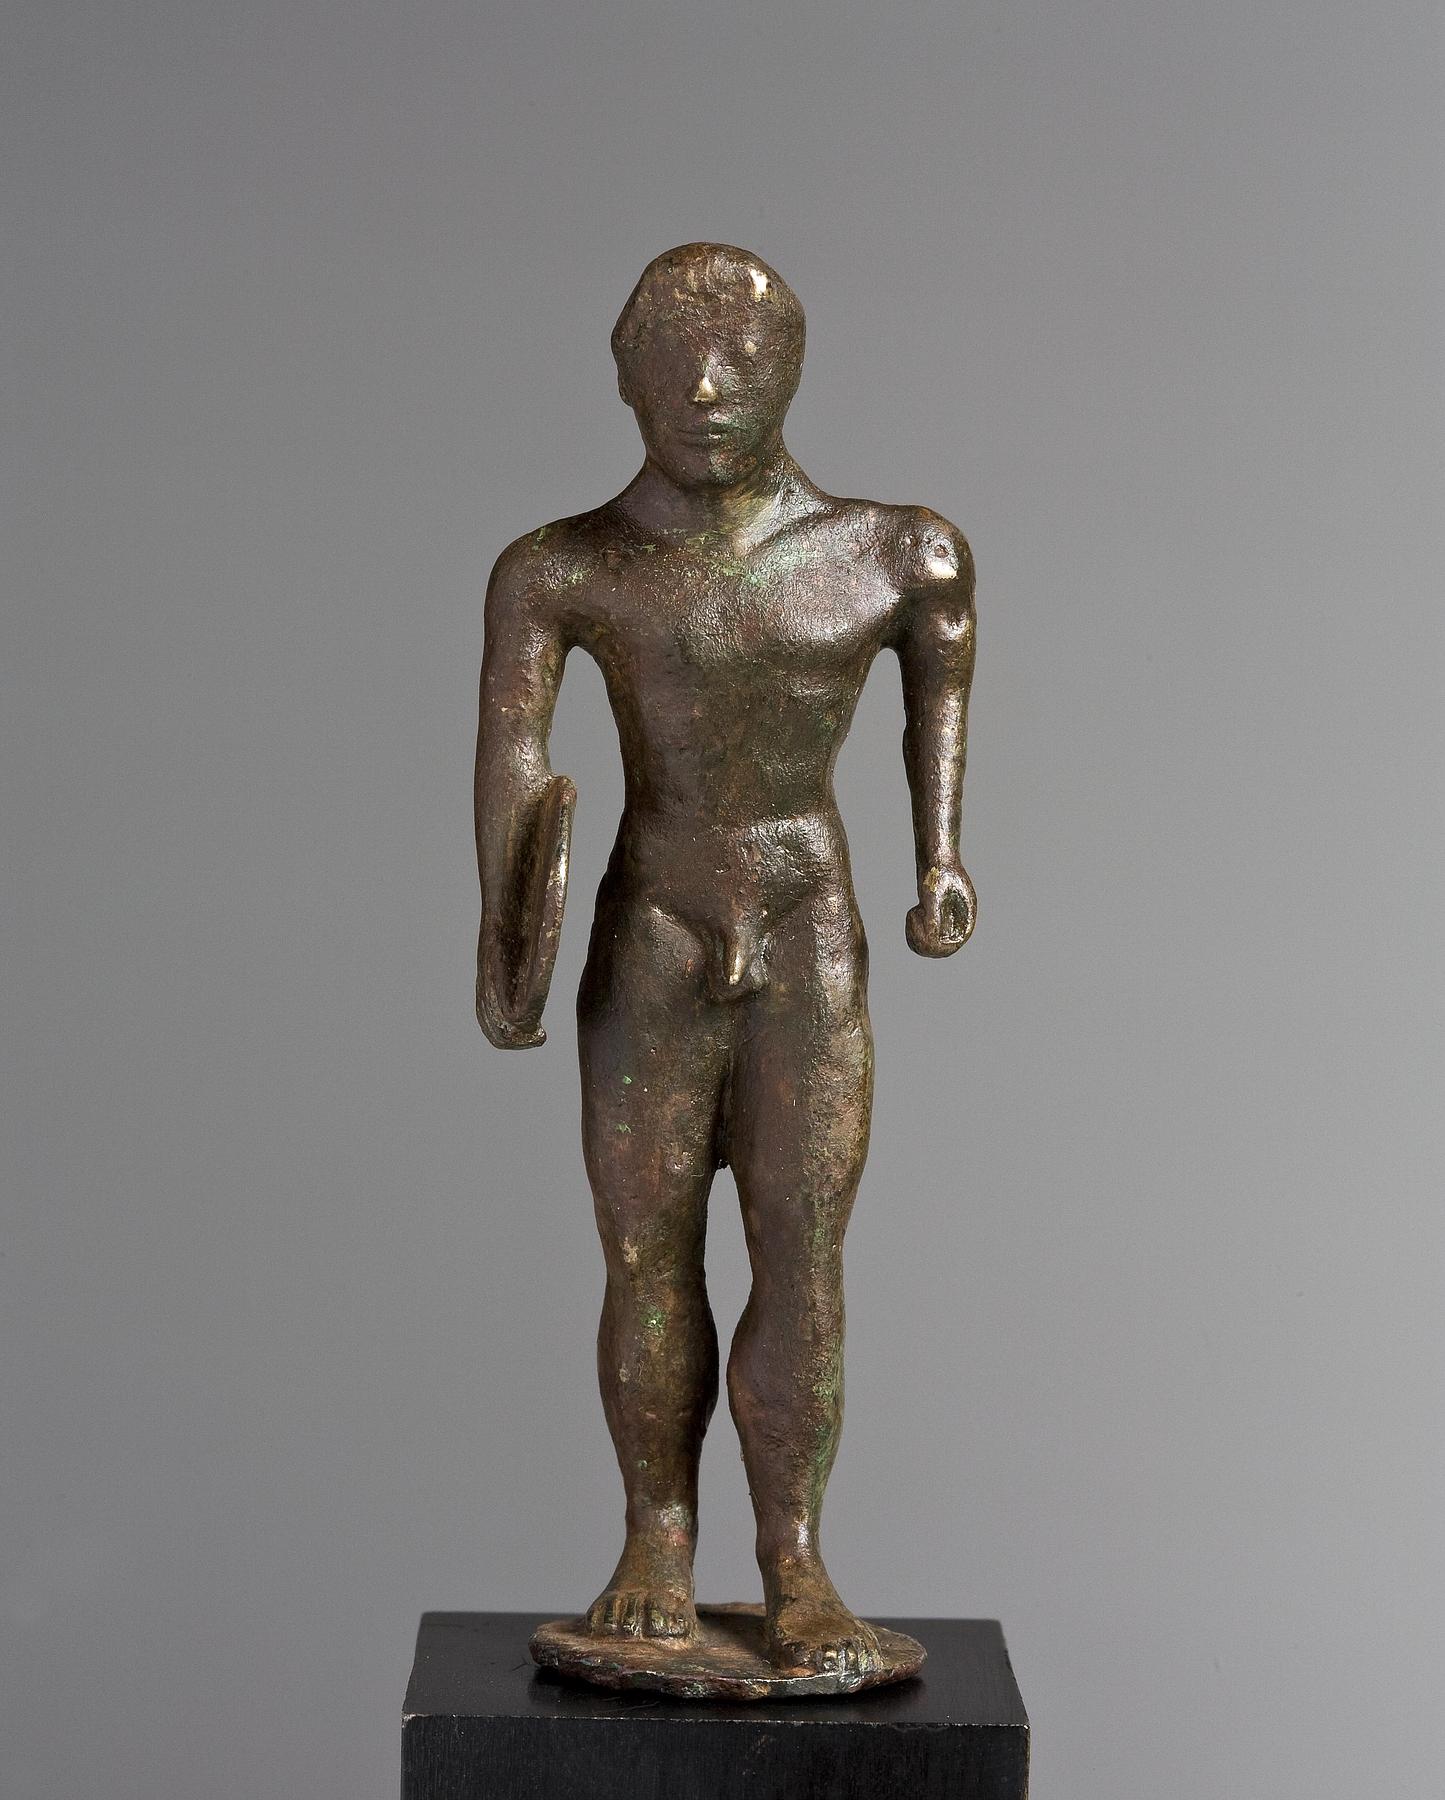 Statuette of an athlete, H2018